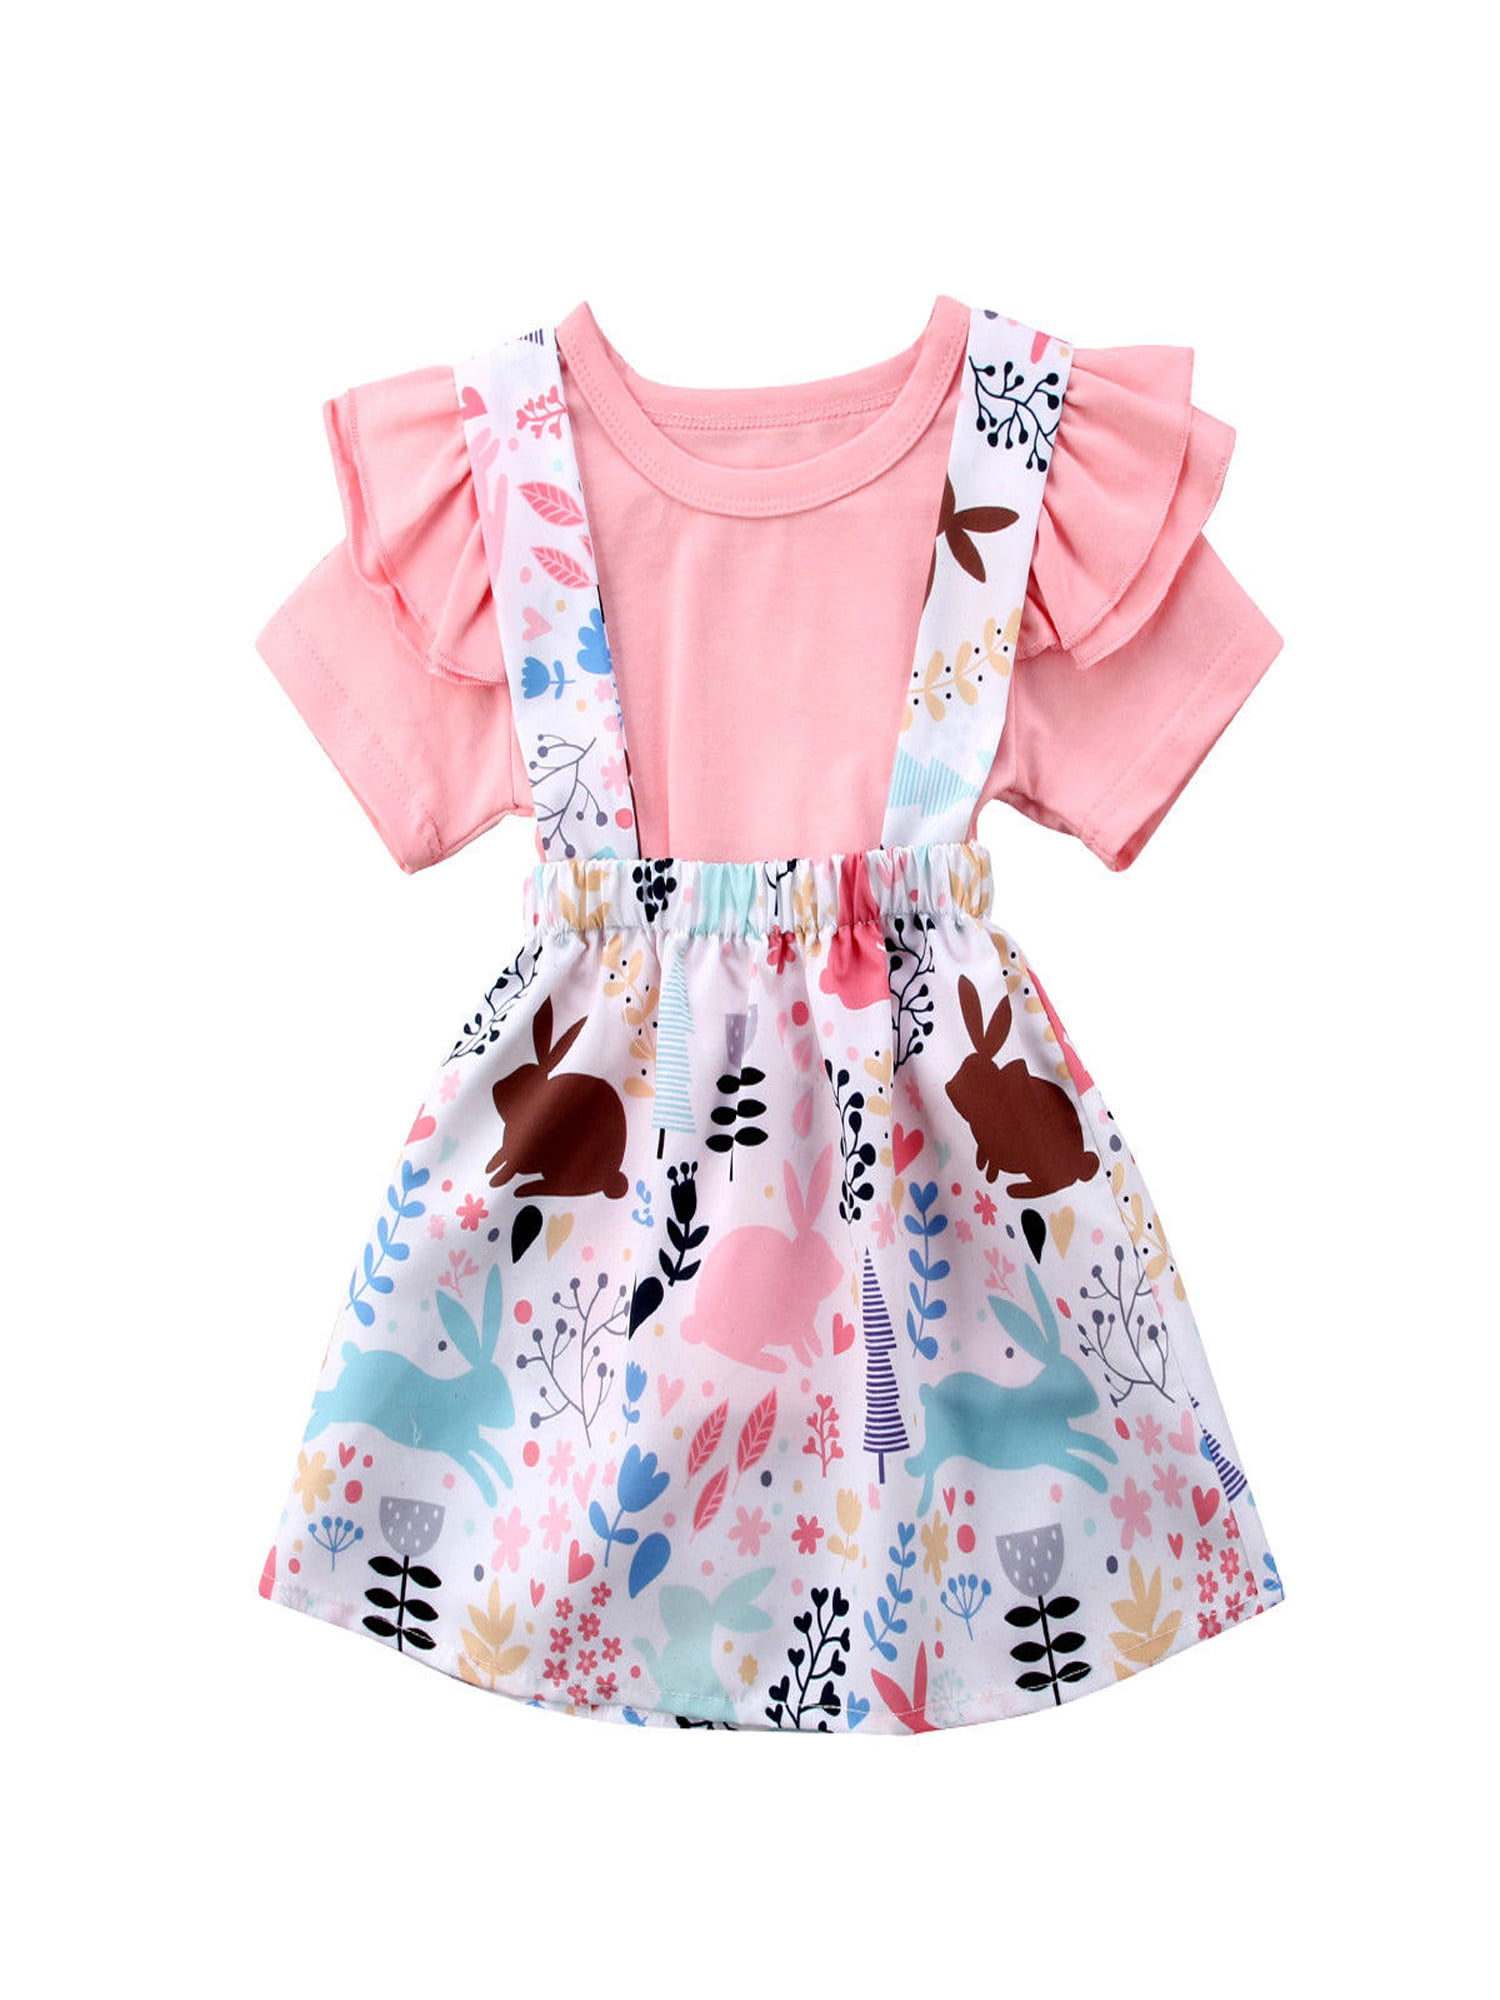 2PCS Lovely Toddler Baby Girls Outfits Lolly T-shirt  Short Pants Clothes Set 